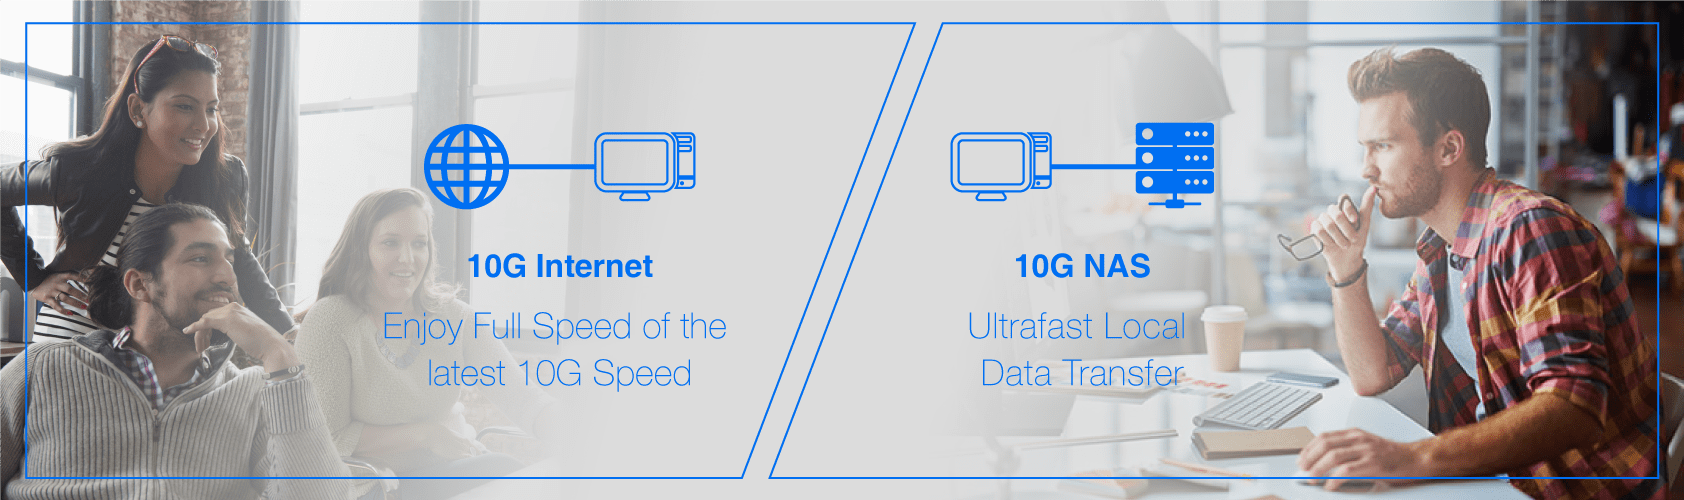 10GBast-T speed  on 10G network card, XG-C100C, provides 10G speed for 10 times faster data transferring.